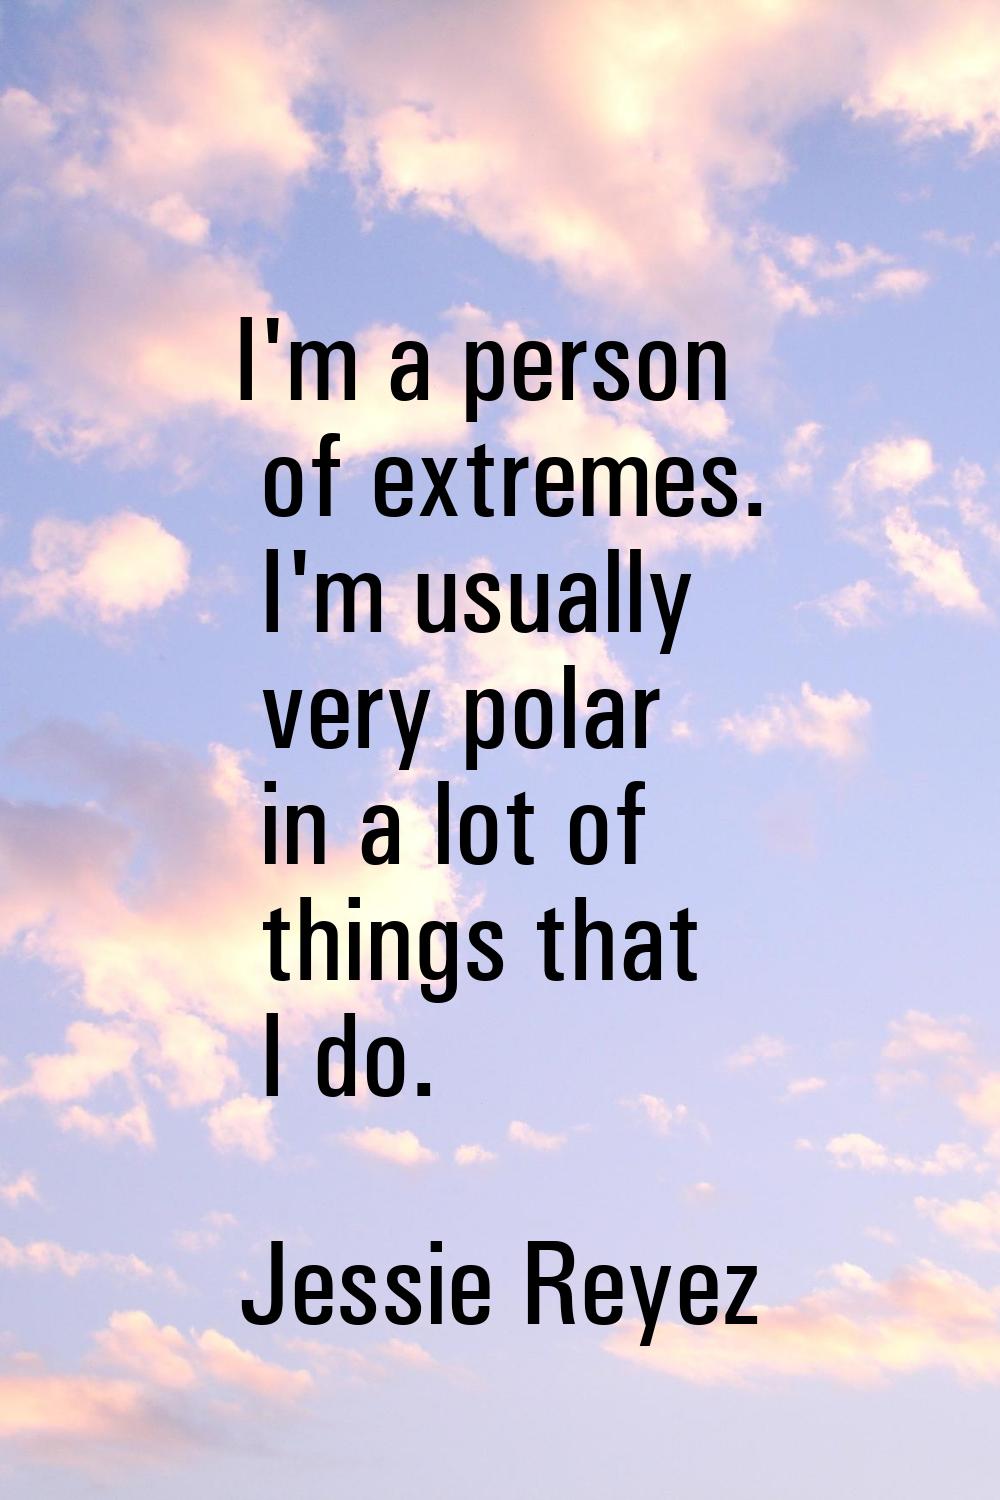 I'm a person of extremes. I'm usually very polar in a lot of things that I do.